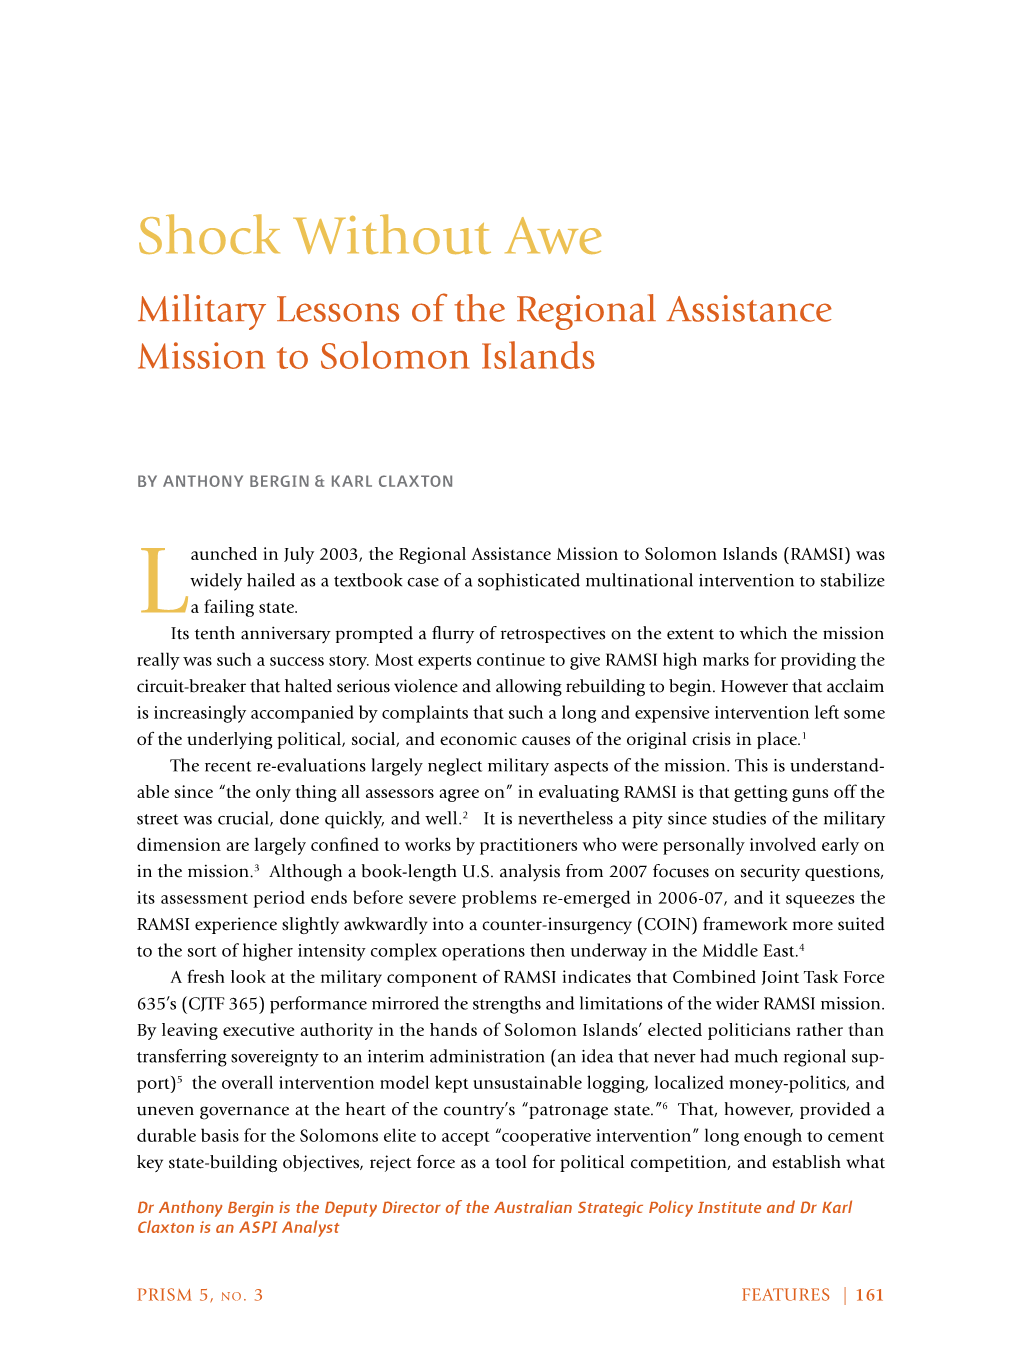 Shock Without Awe Military Lessons of the Regional Assistance Mission to Solomon Islands